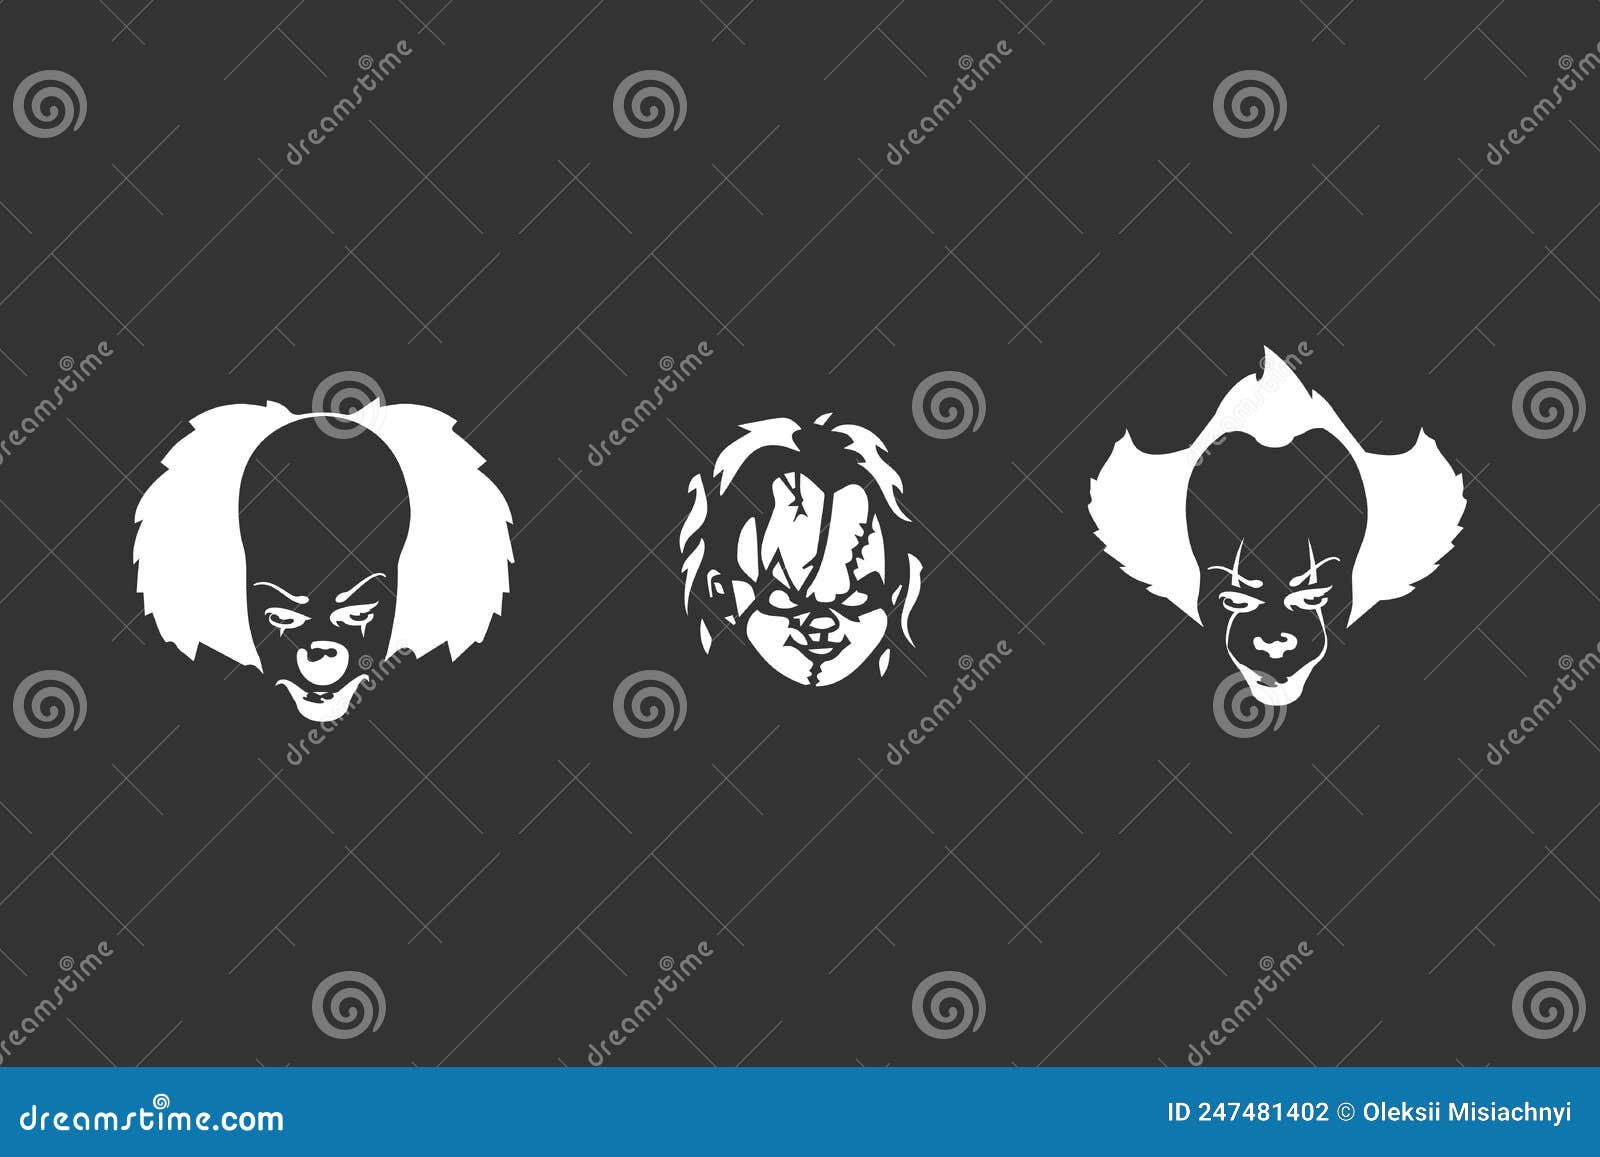 Clown Avatar Outline Icon Graphic by SIKEY STUDIO · Creative Fabrica